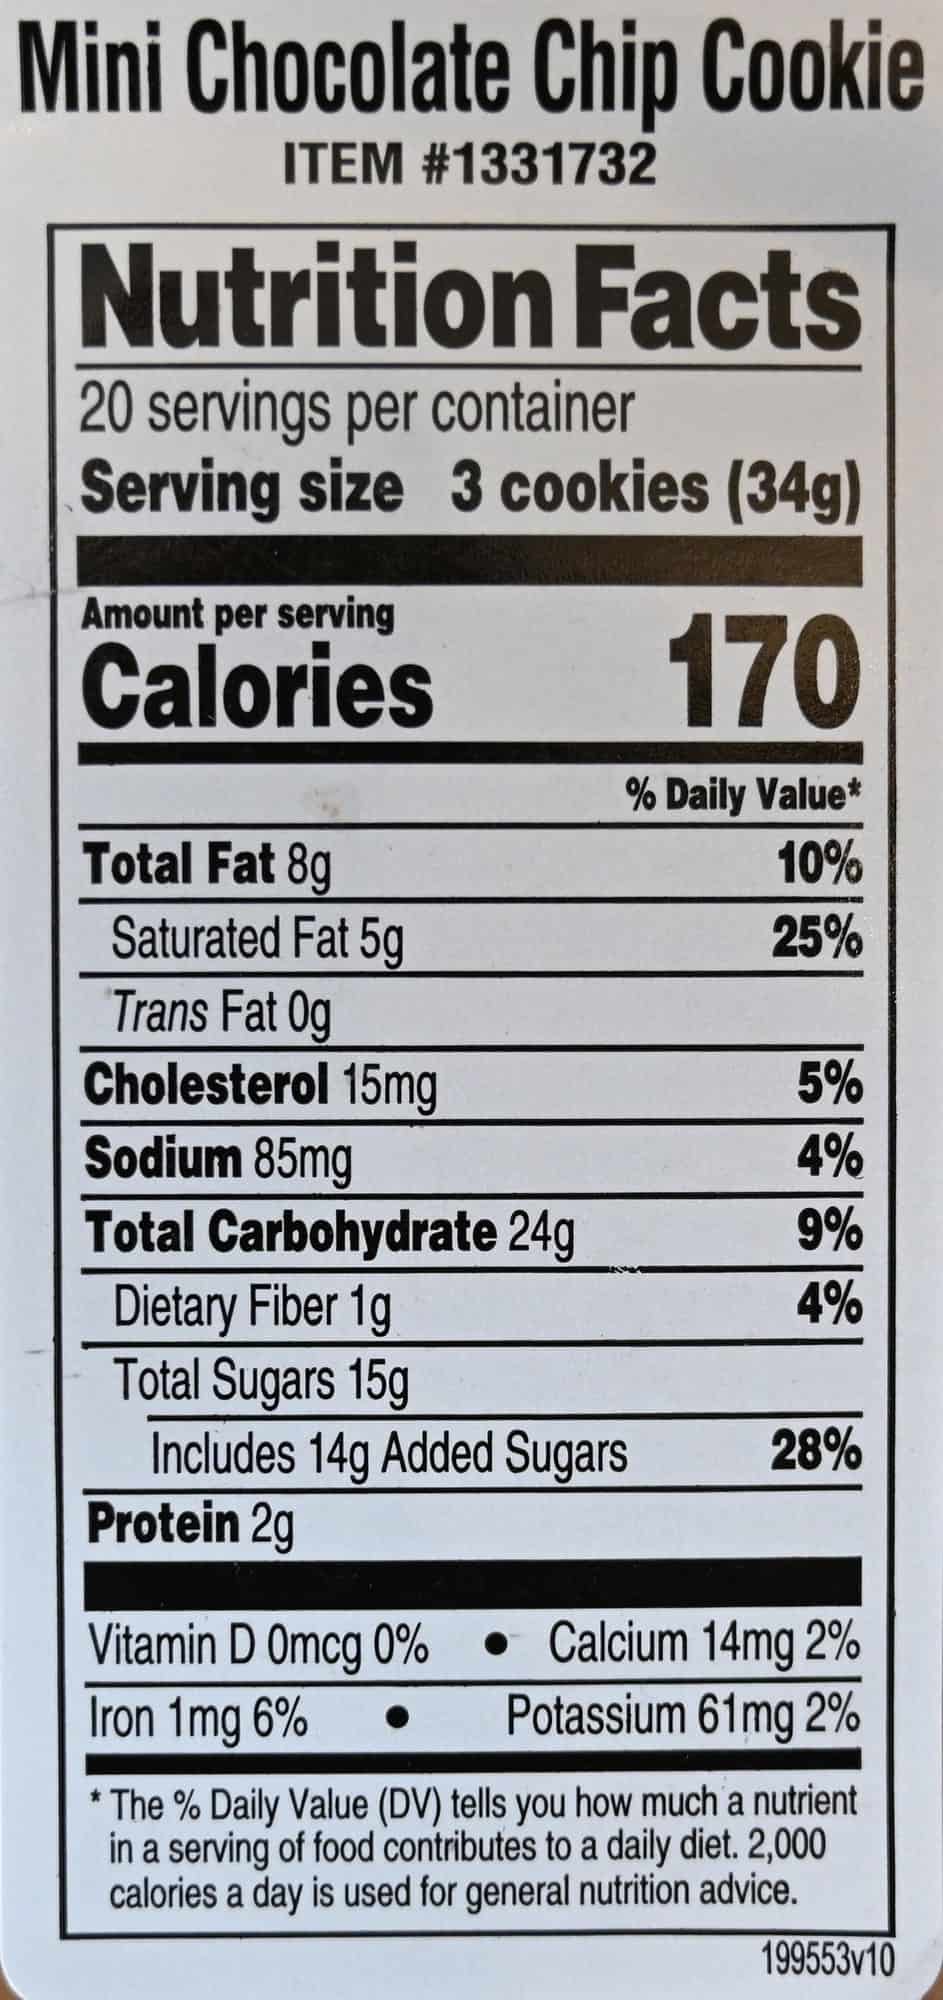 Image of the nutrition facts label for the mini chocolate chip cookies from the container.